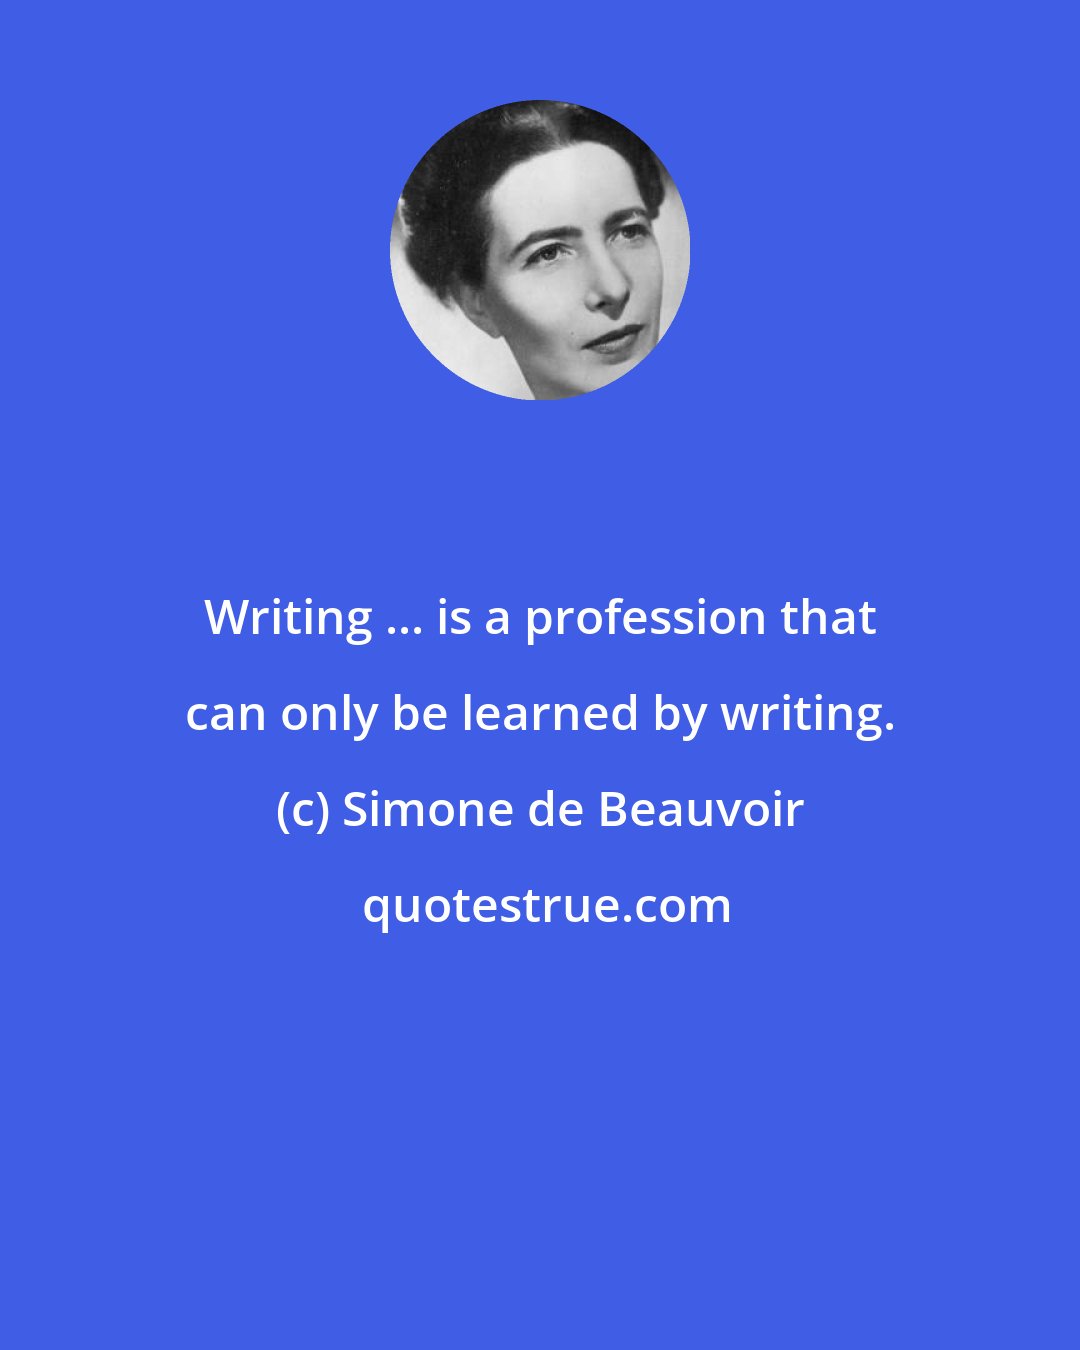 Simone de Beauvoir: Writing ... is a profession that can only be learned by writing.